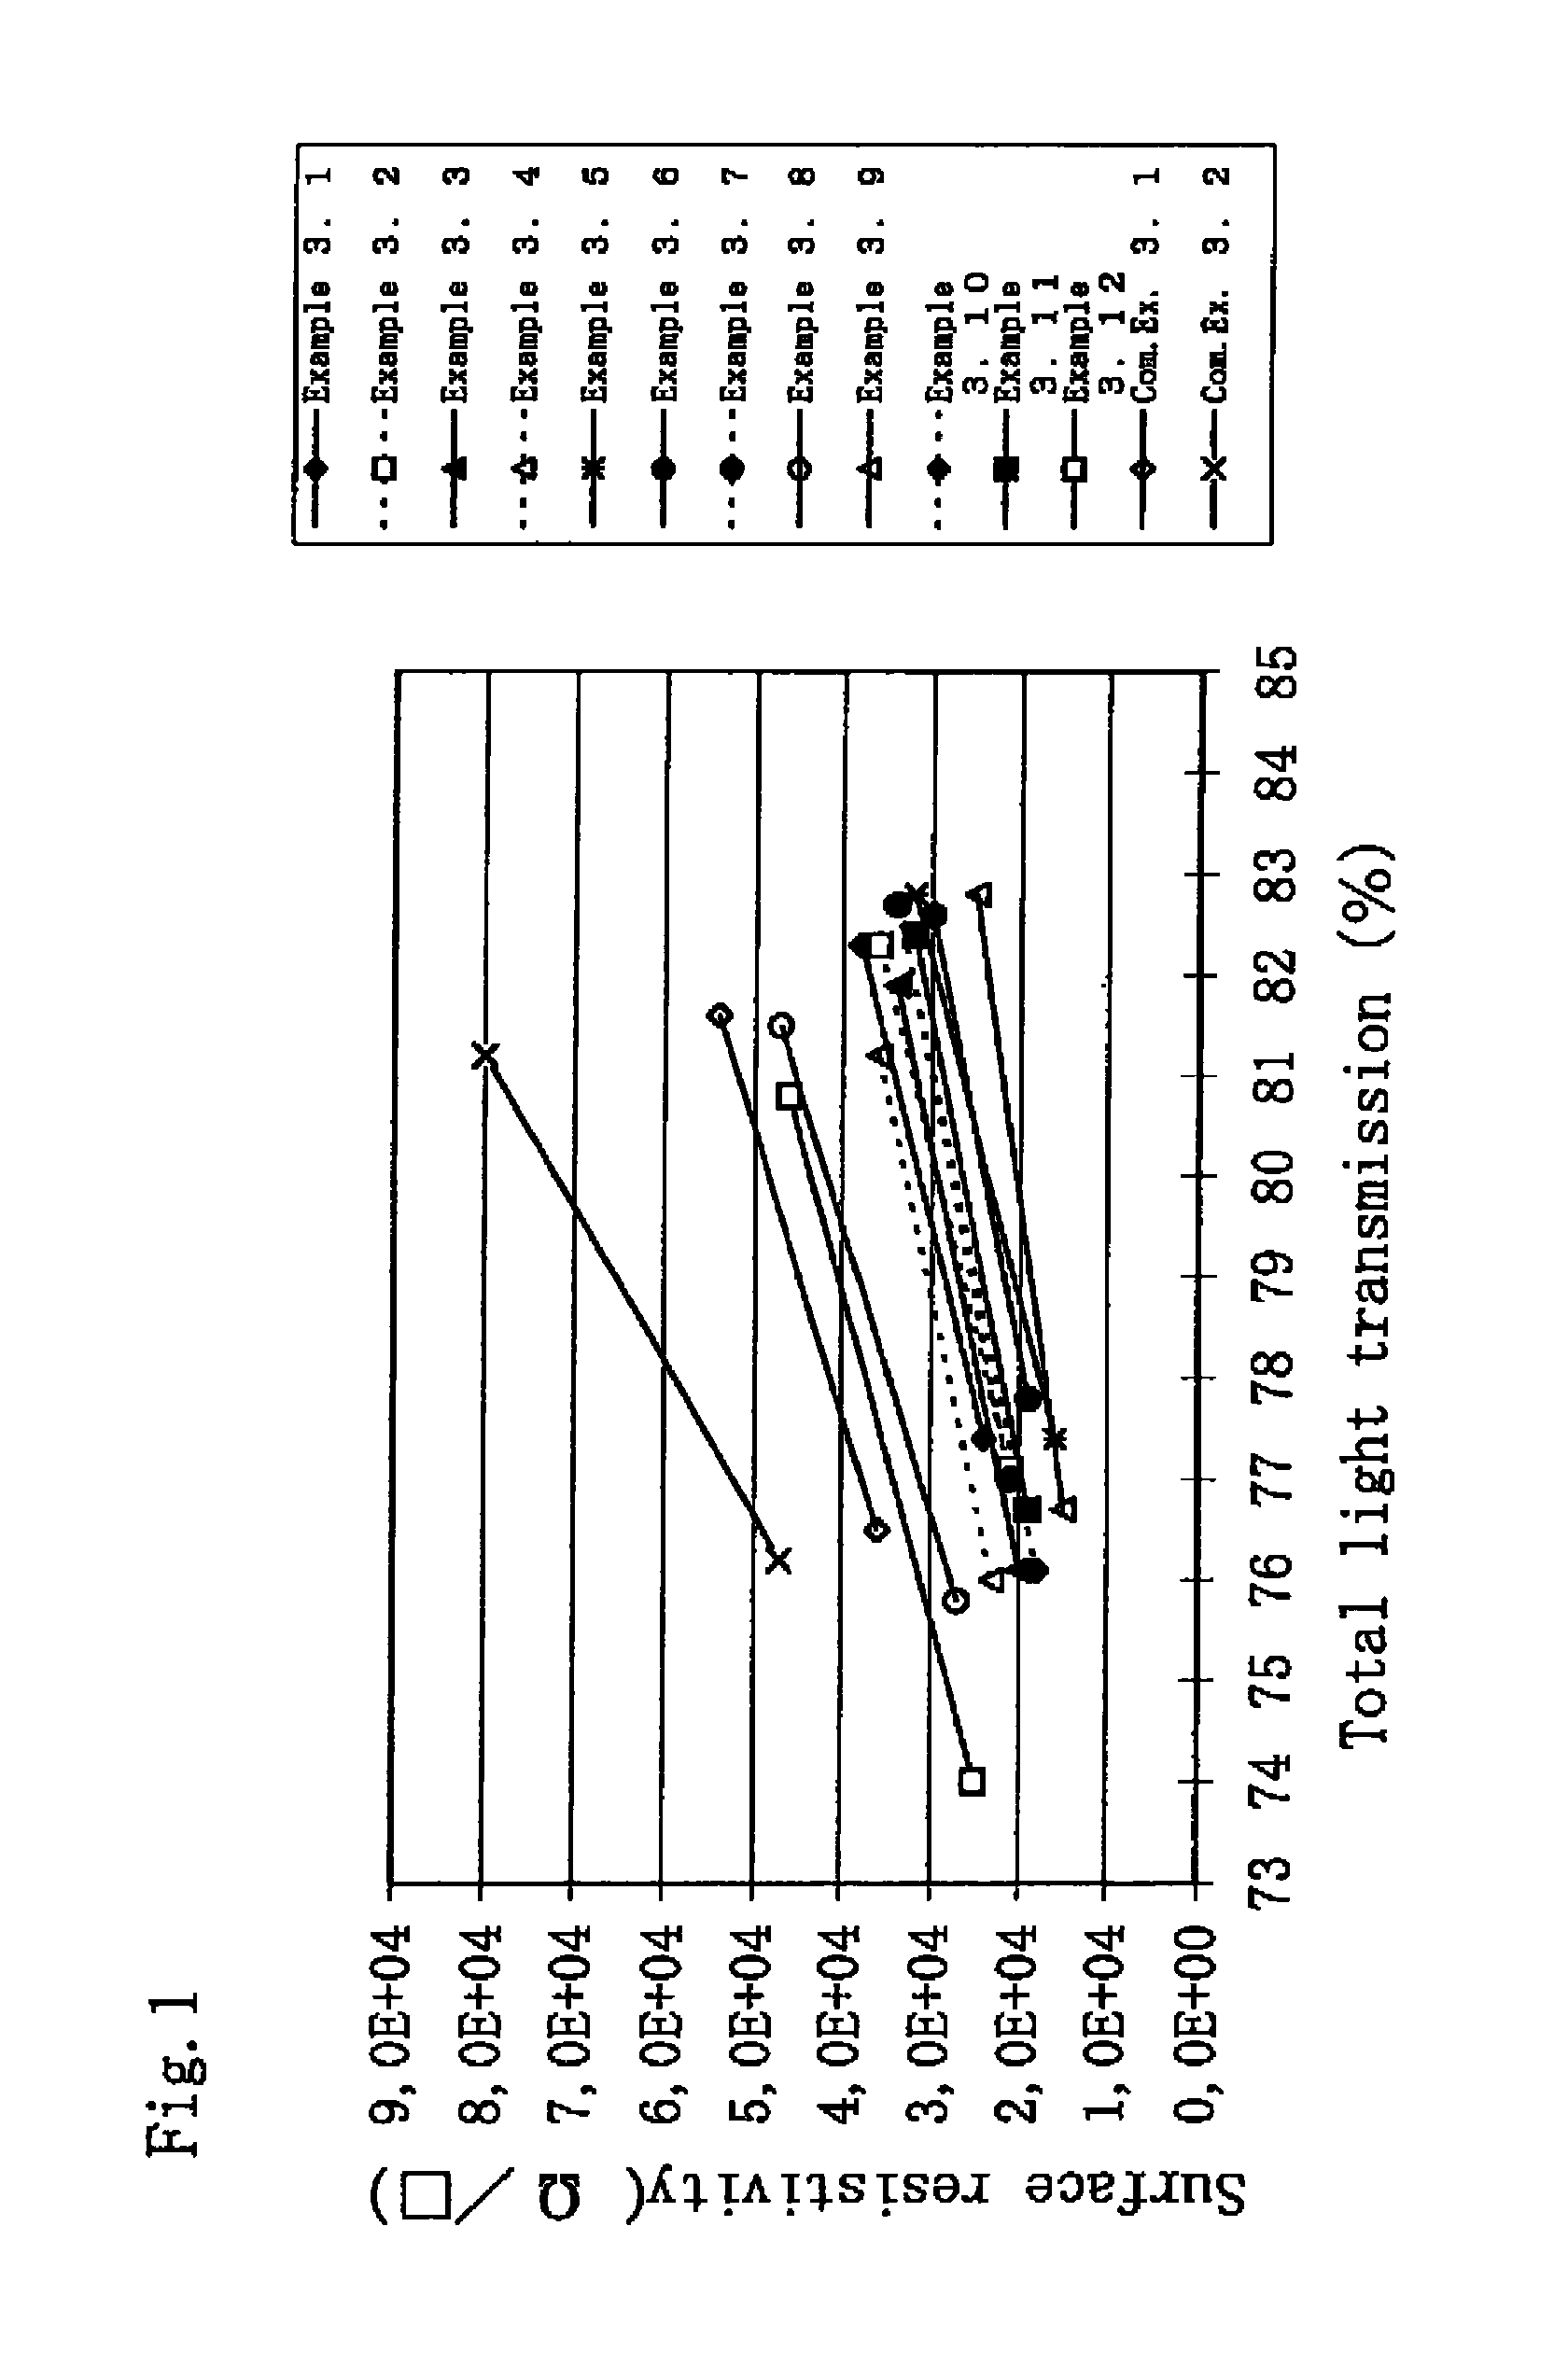 Method for producing an aqueous dispersion containing a complex of poly(3,4-dialkoxythiophene) and a polyanion